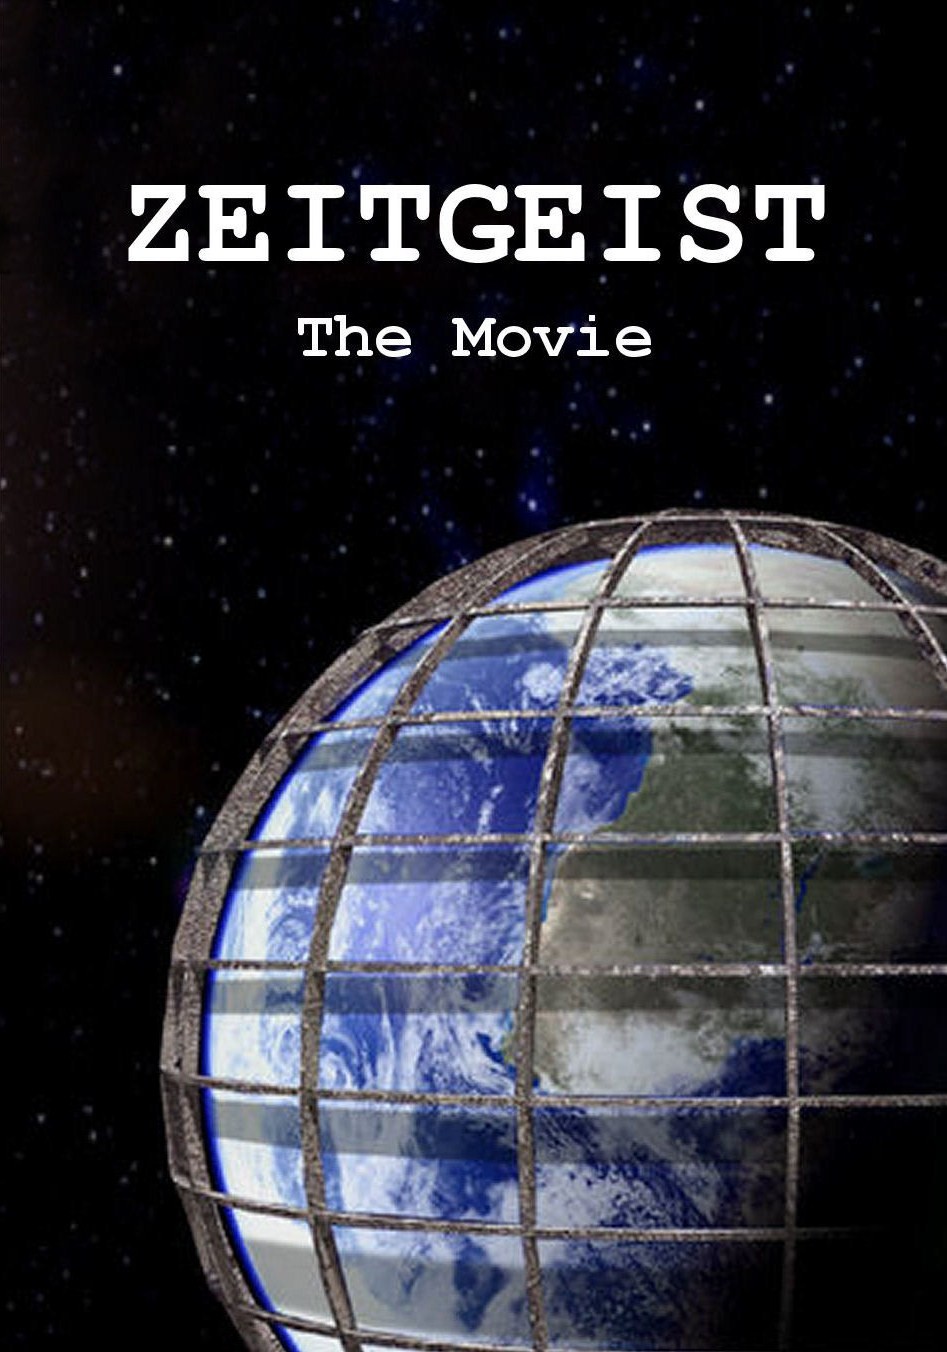 42 HQ Pictures Zeitgeist The Movie Streaming : PlayTamil 2021 - Free Website TO Download Tamil Movies ...